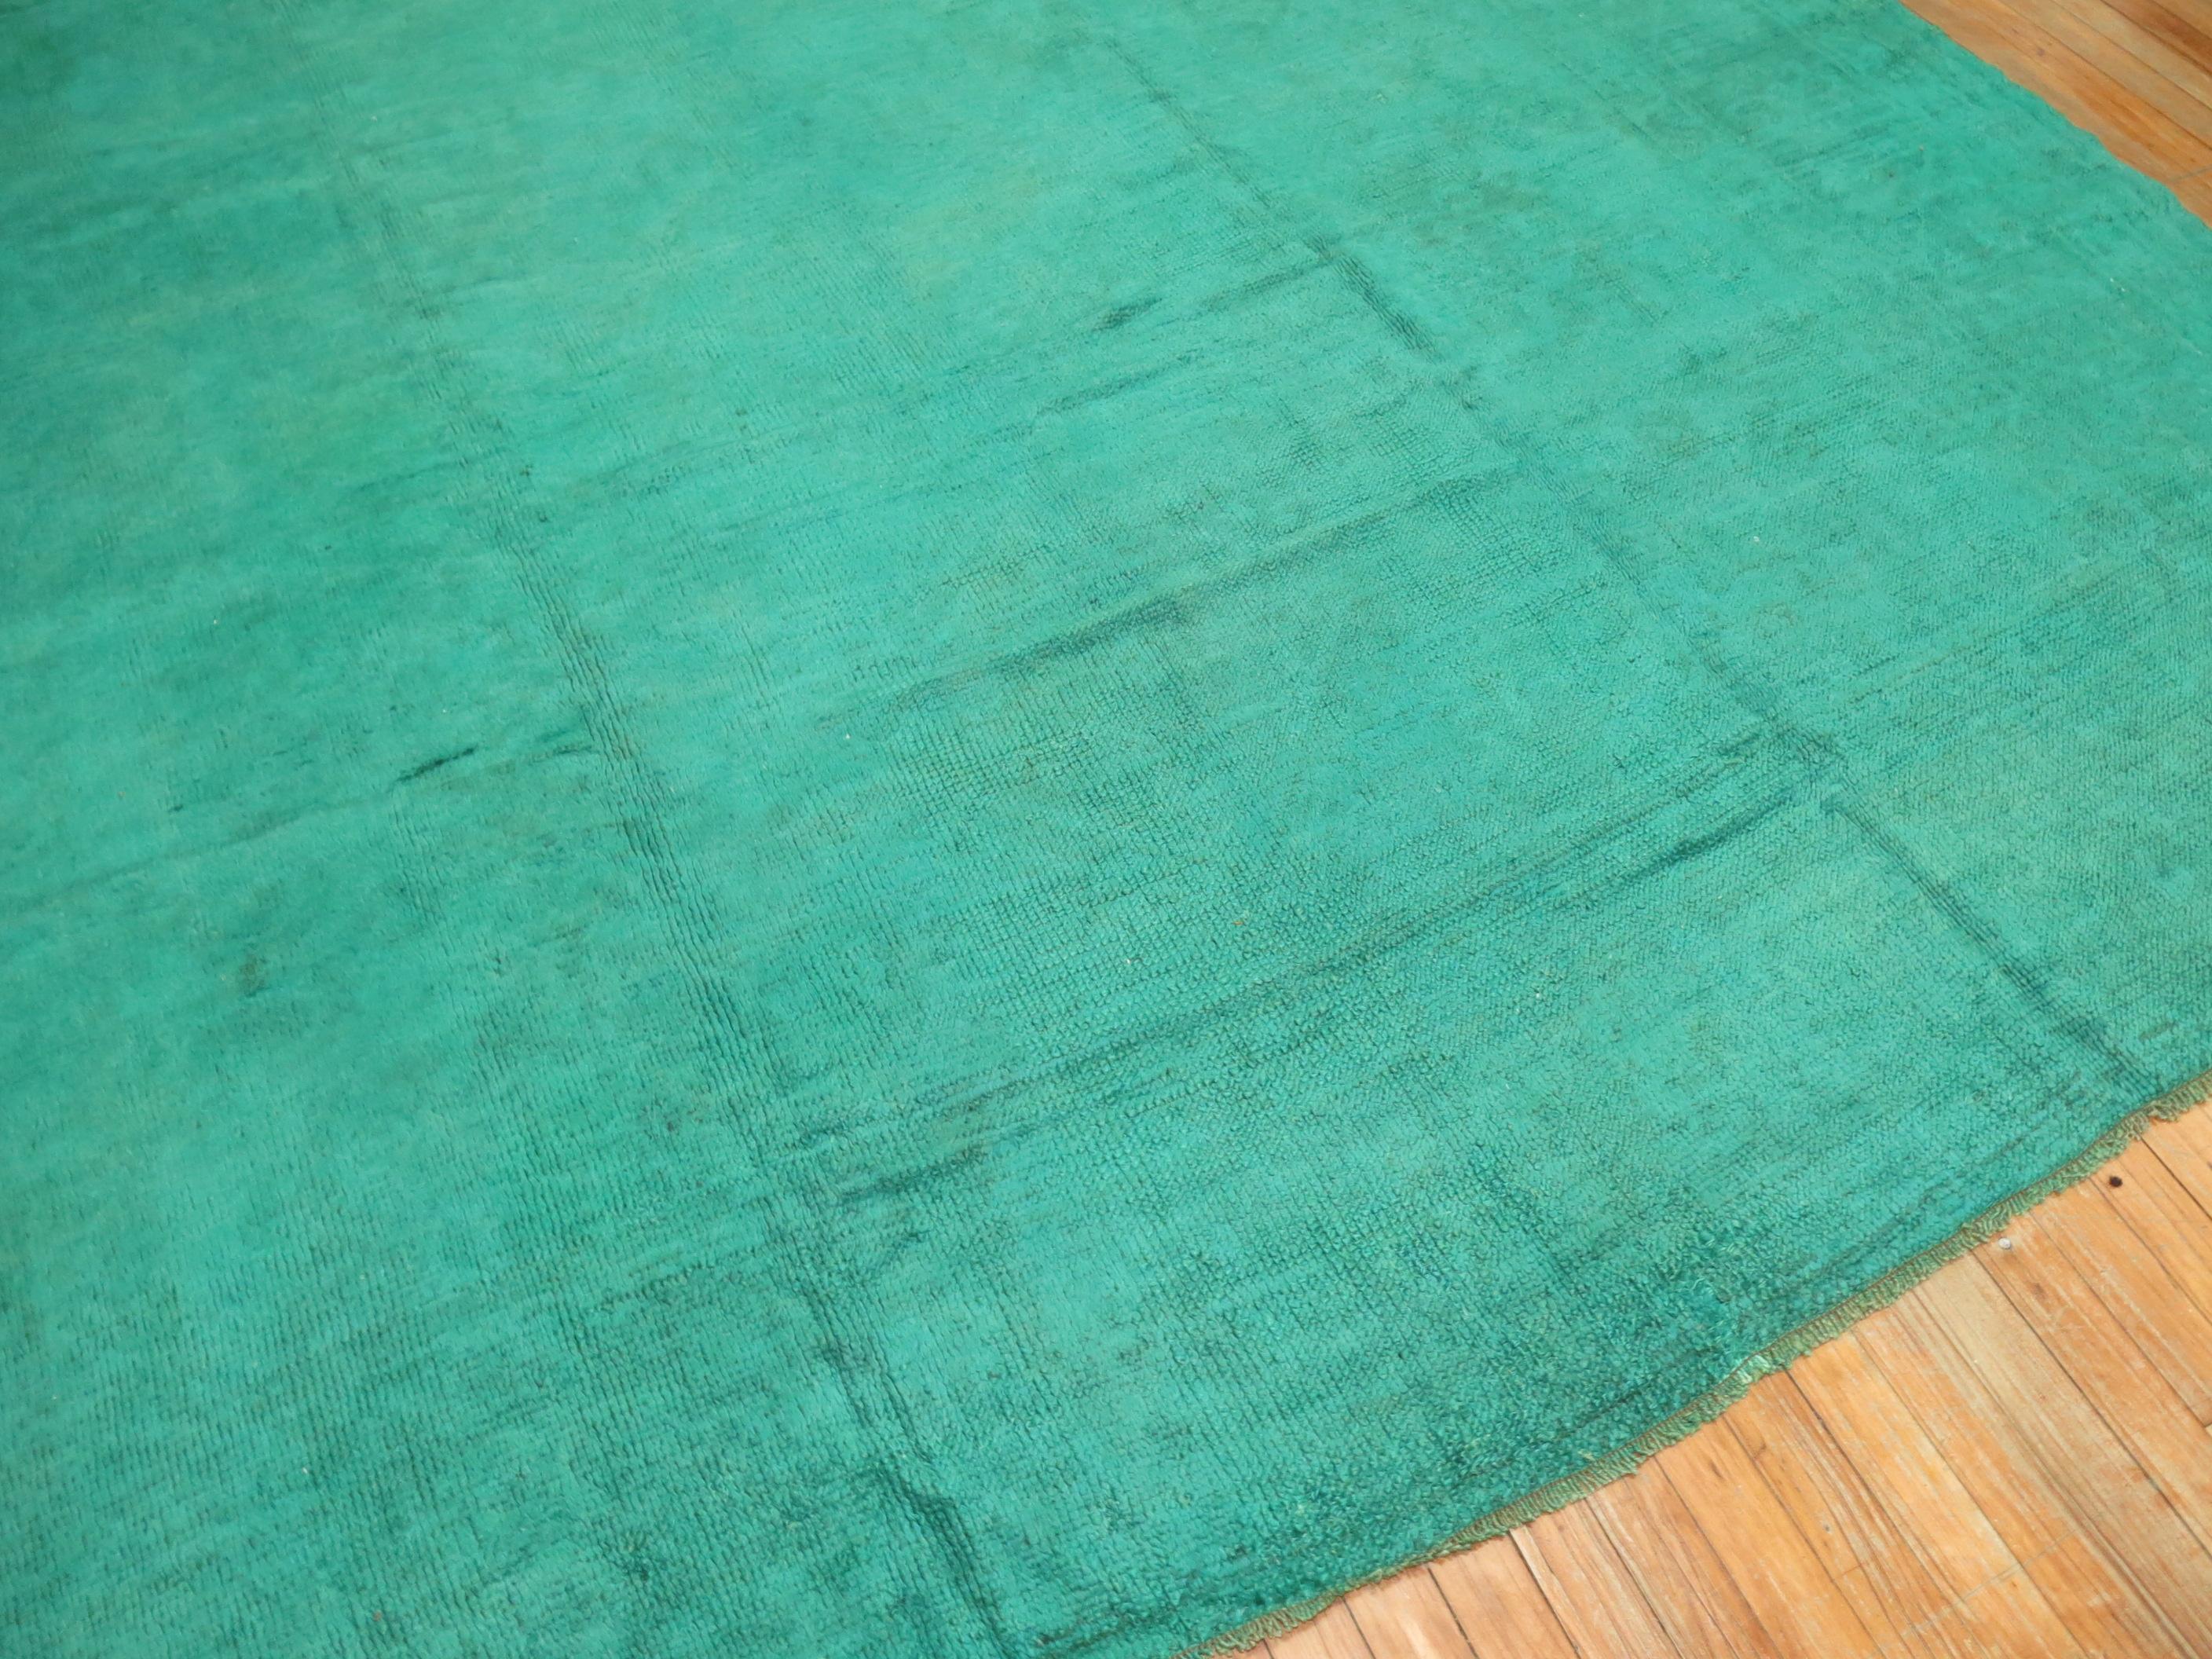 Antique square Angora wool Oushak rug that has been over-dyed in emerald green to give it a beautiful, subdued, and ethereal look. The rug has a chunkier pile and can easily handle heavy everyday traffic.

9' x 9'3''